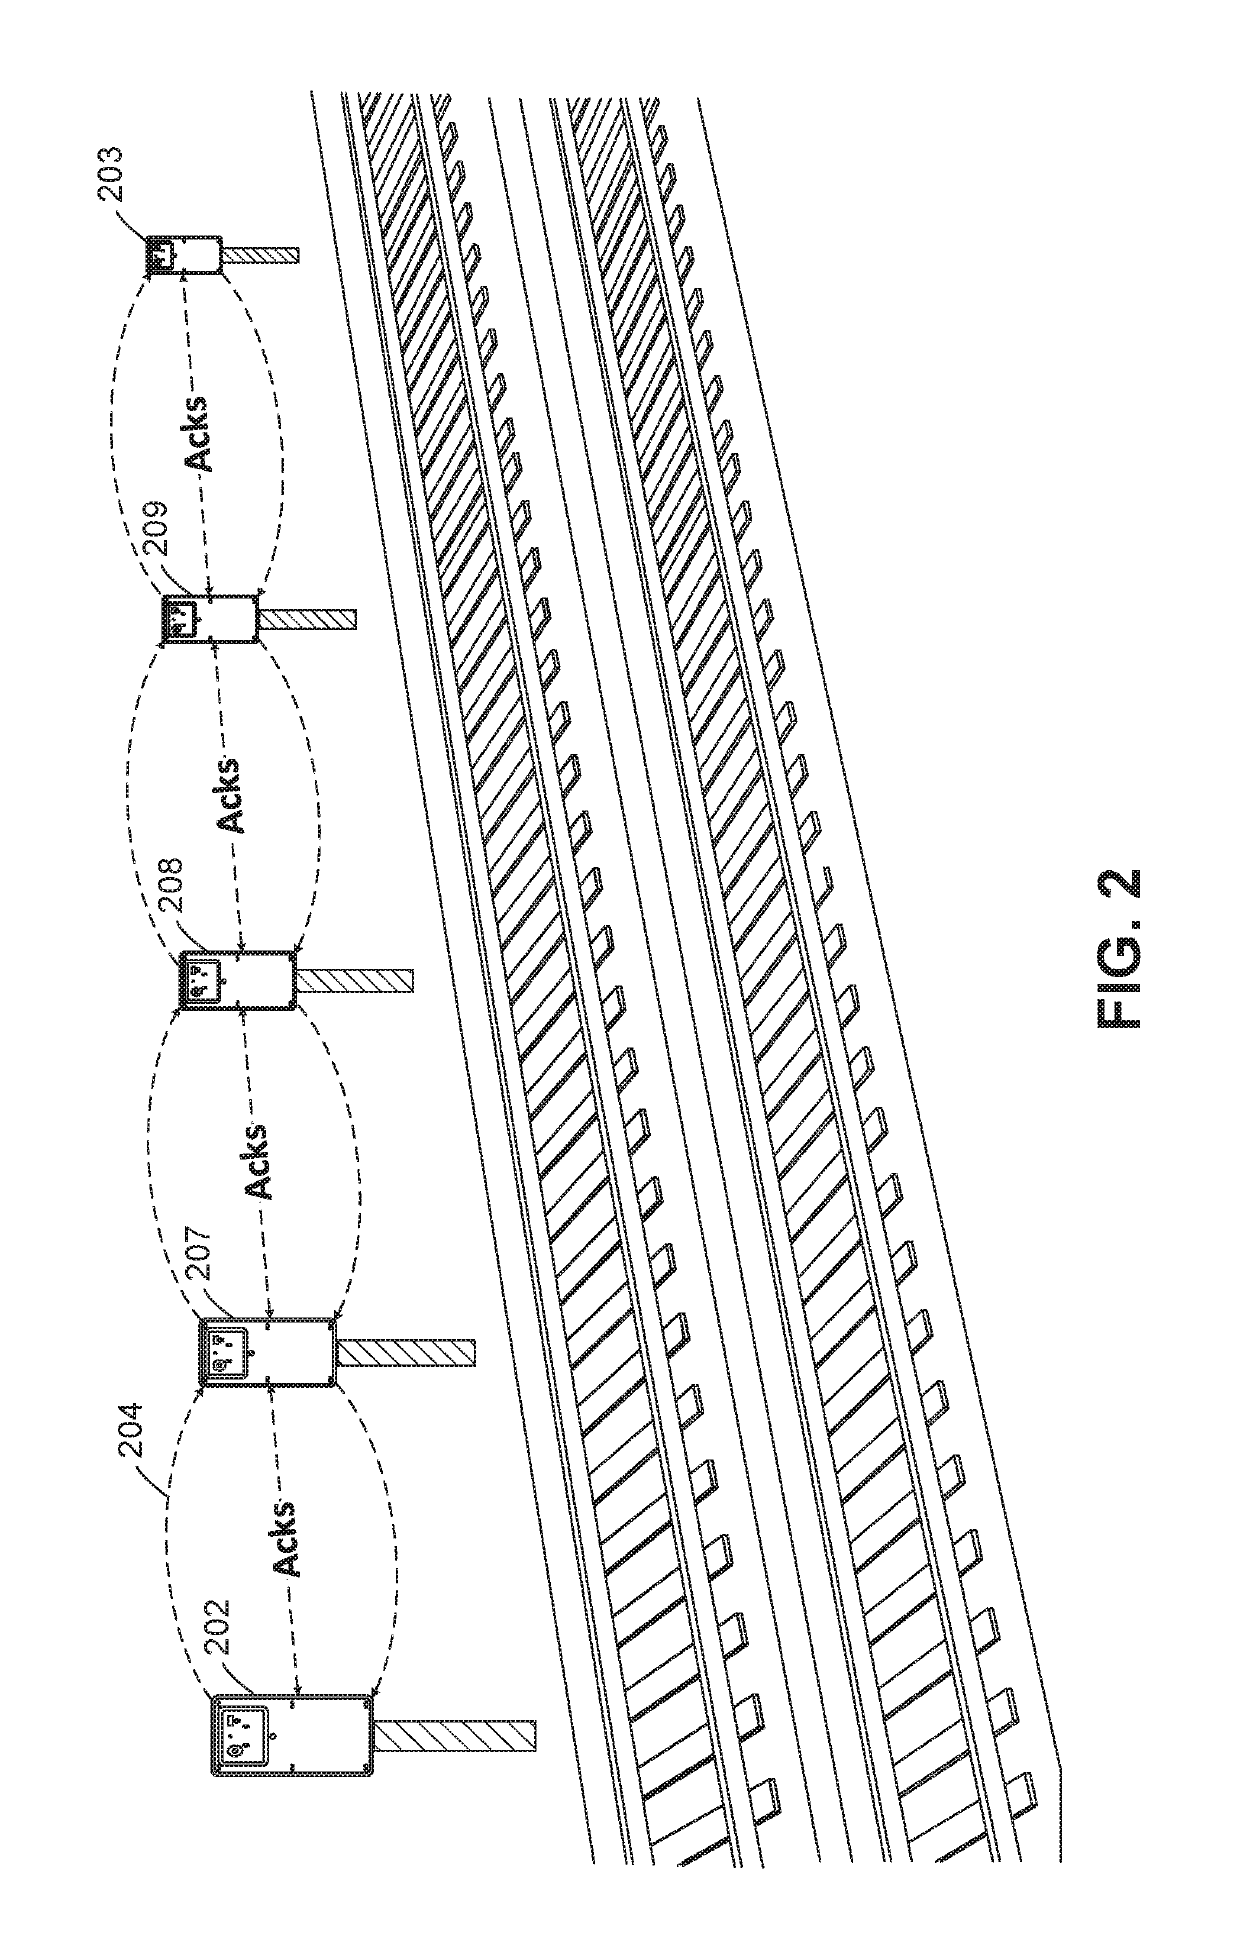 Roadway worker safety system and methods of warning